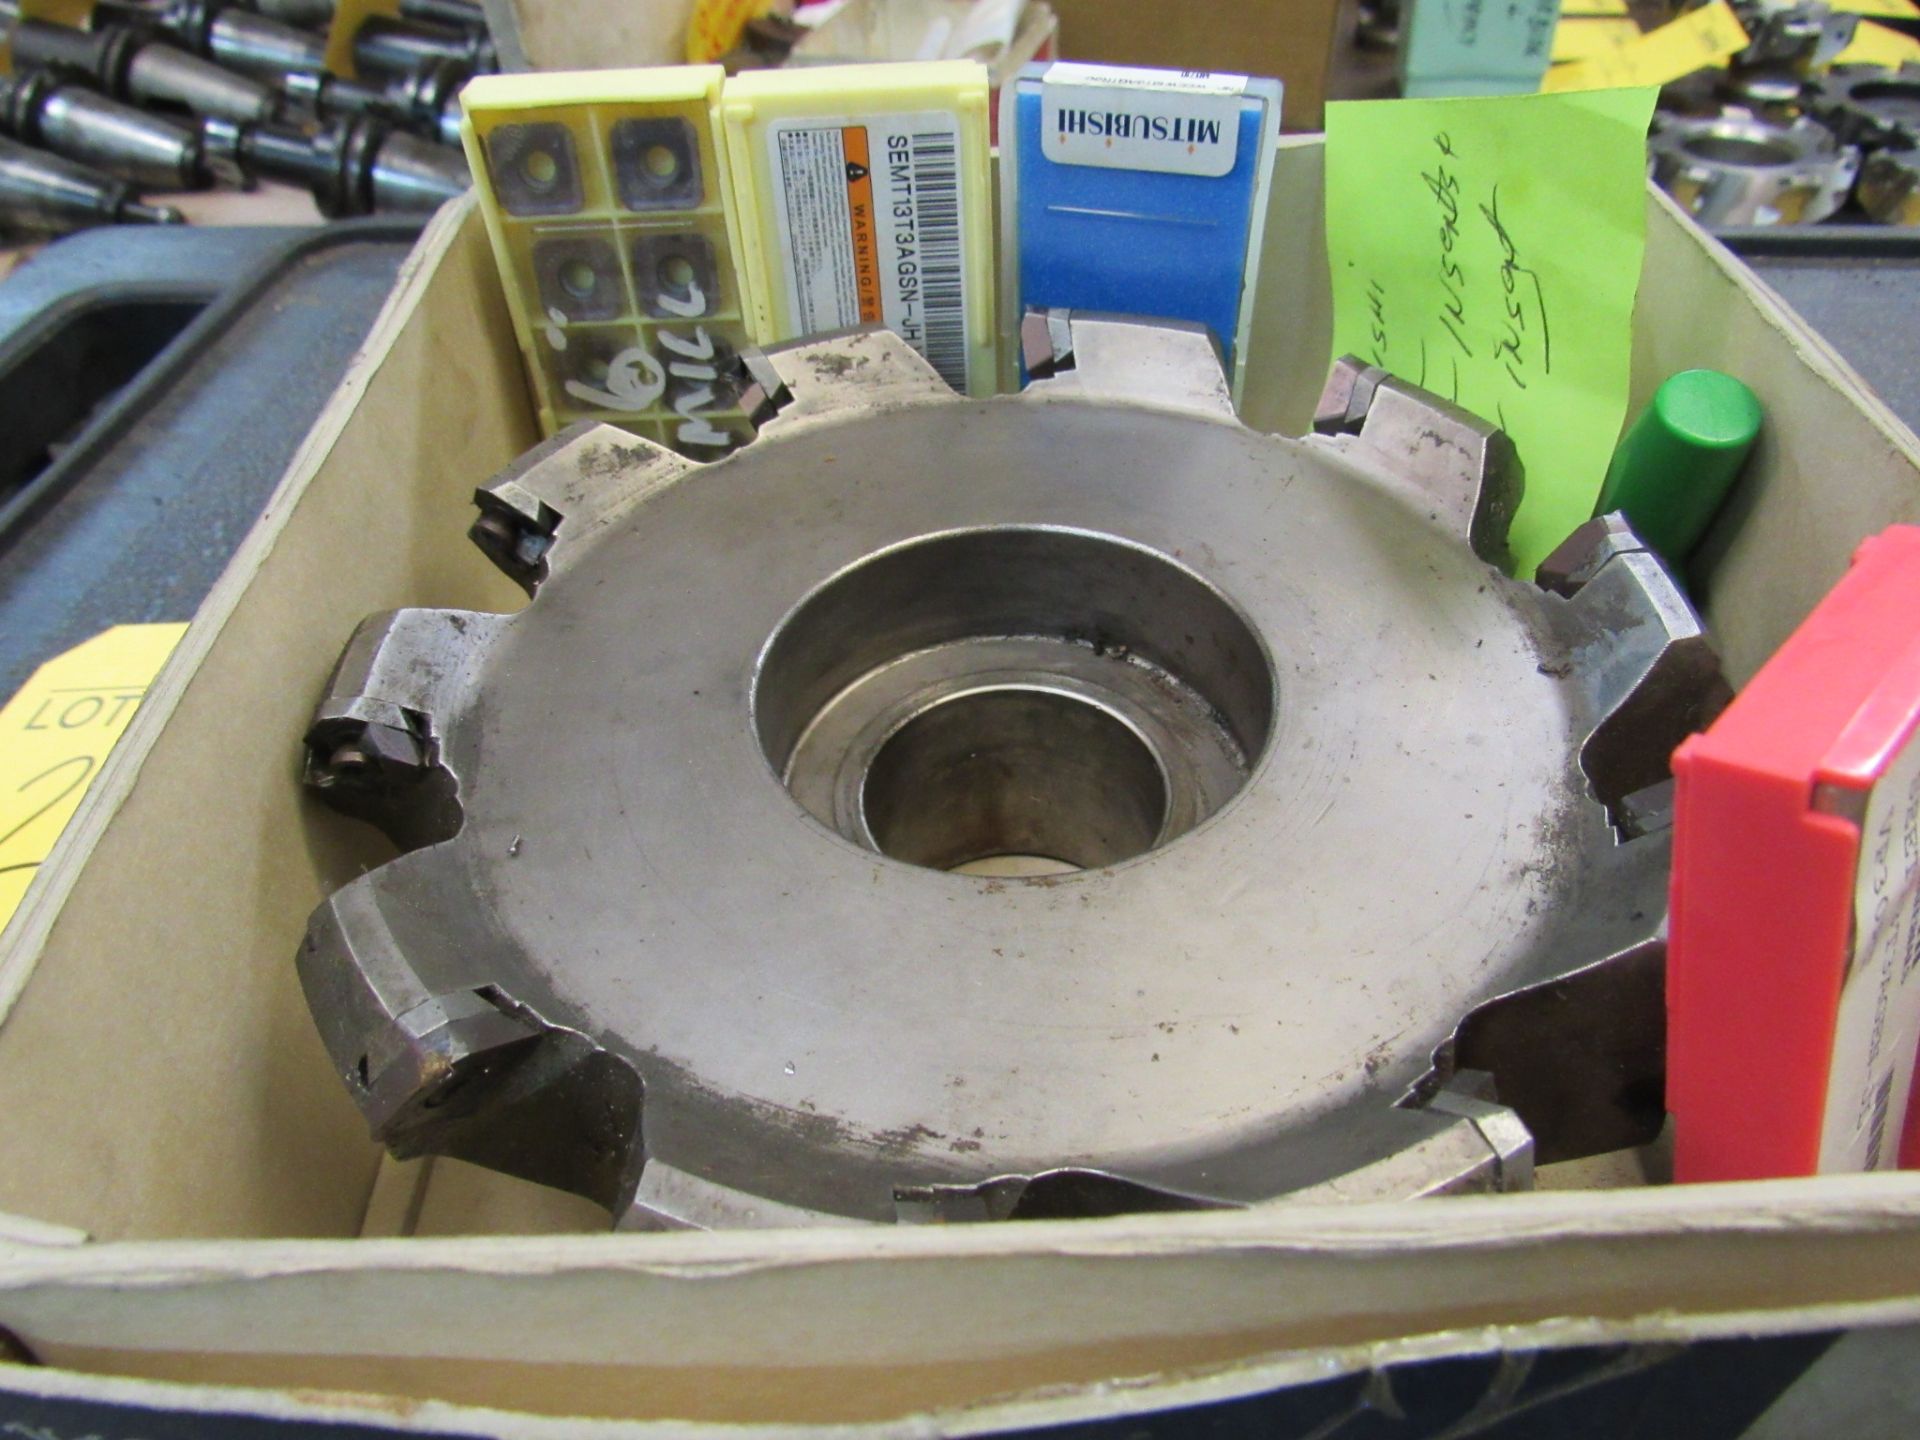 6" MITSUBISI FACE MILL WITH INSERTS - Image 2 of 2